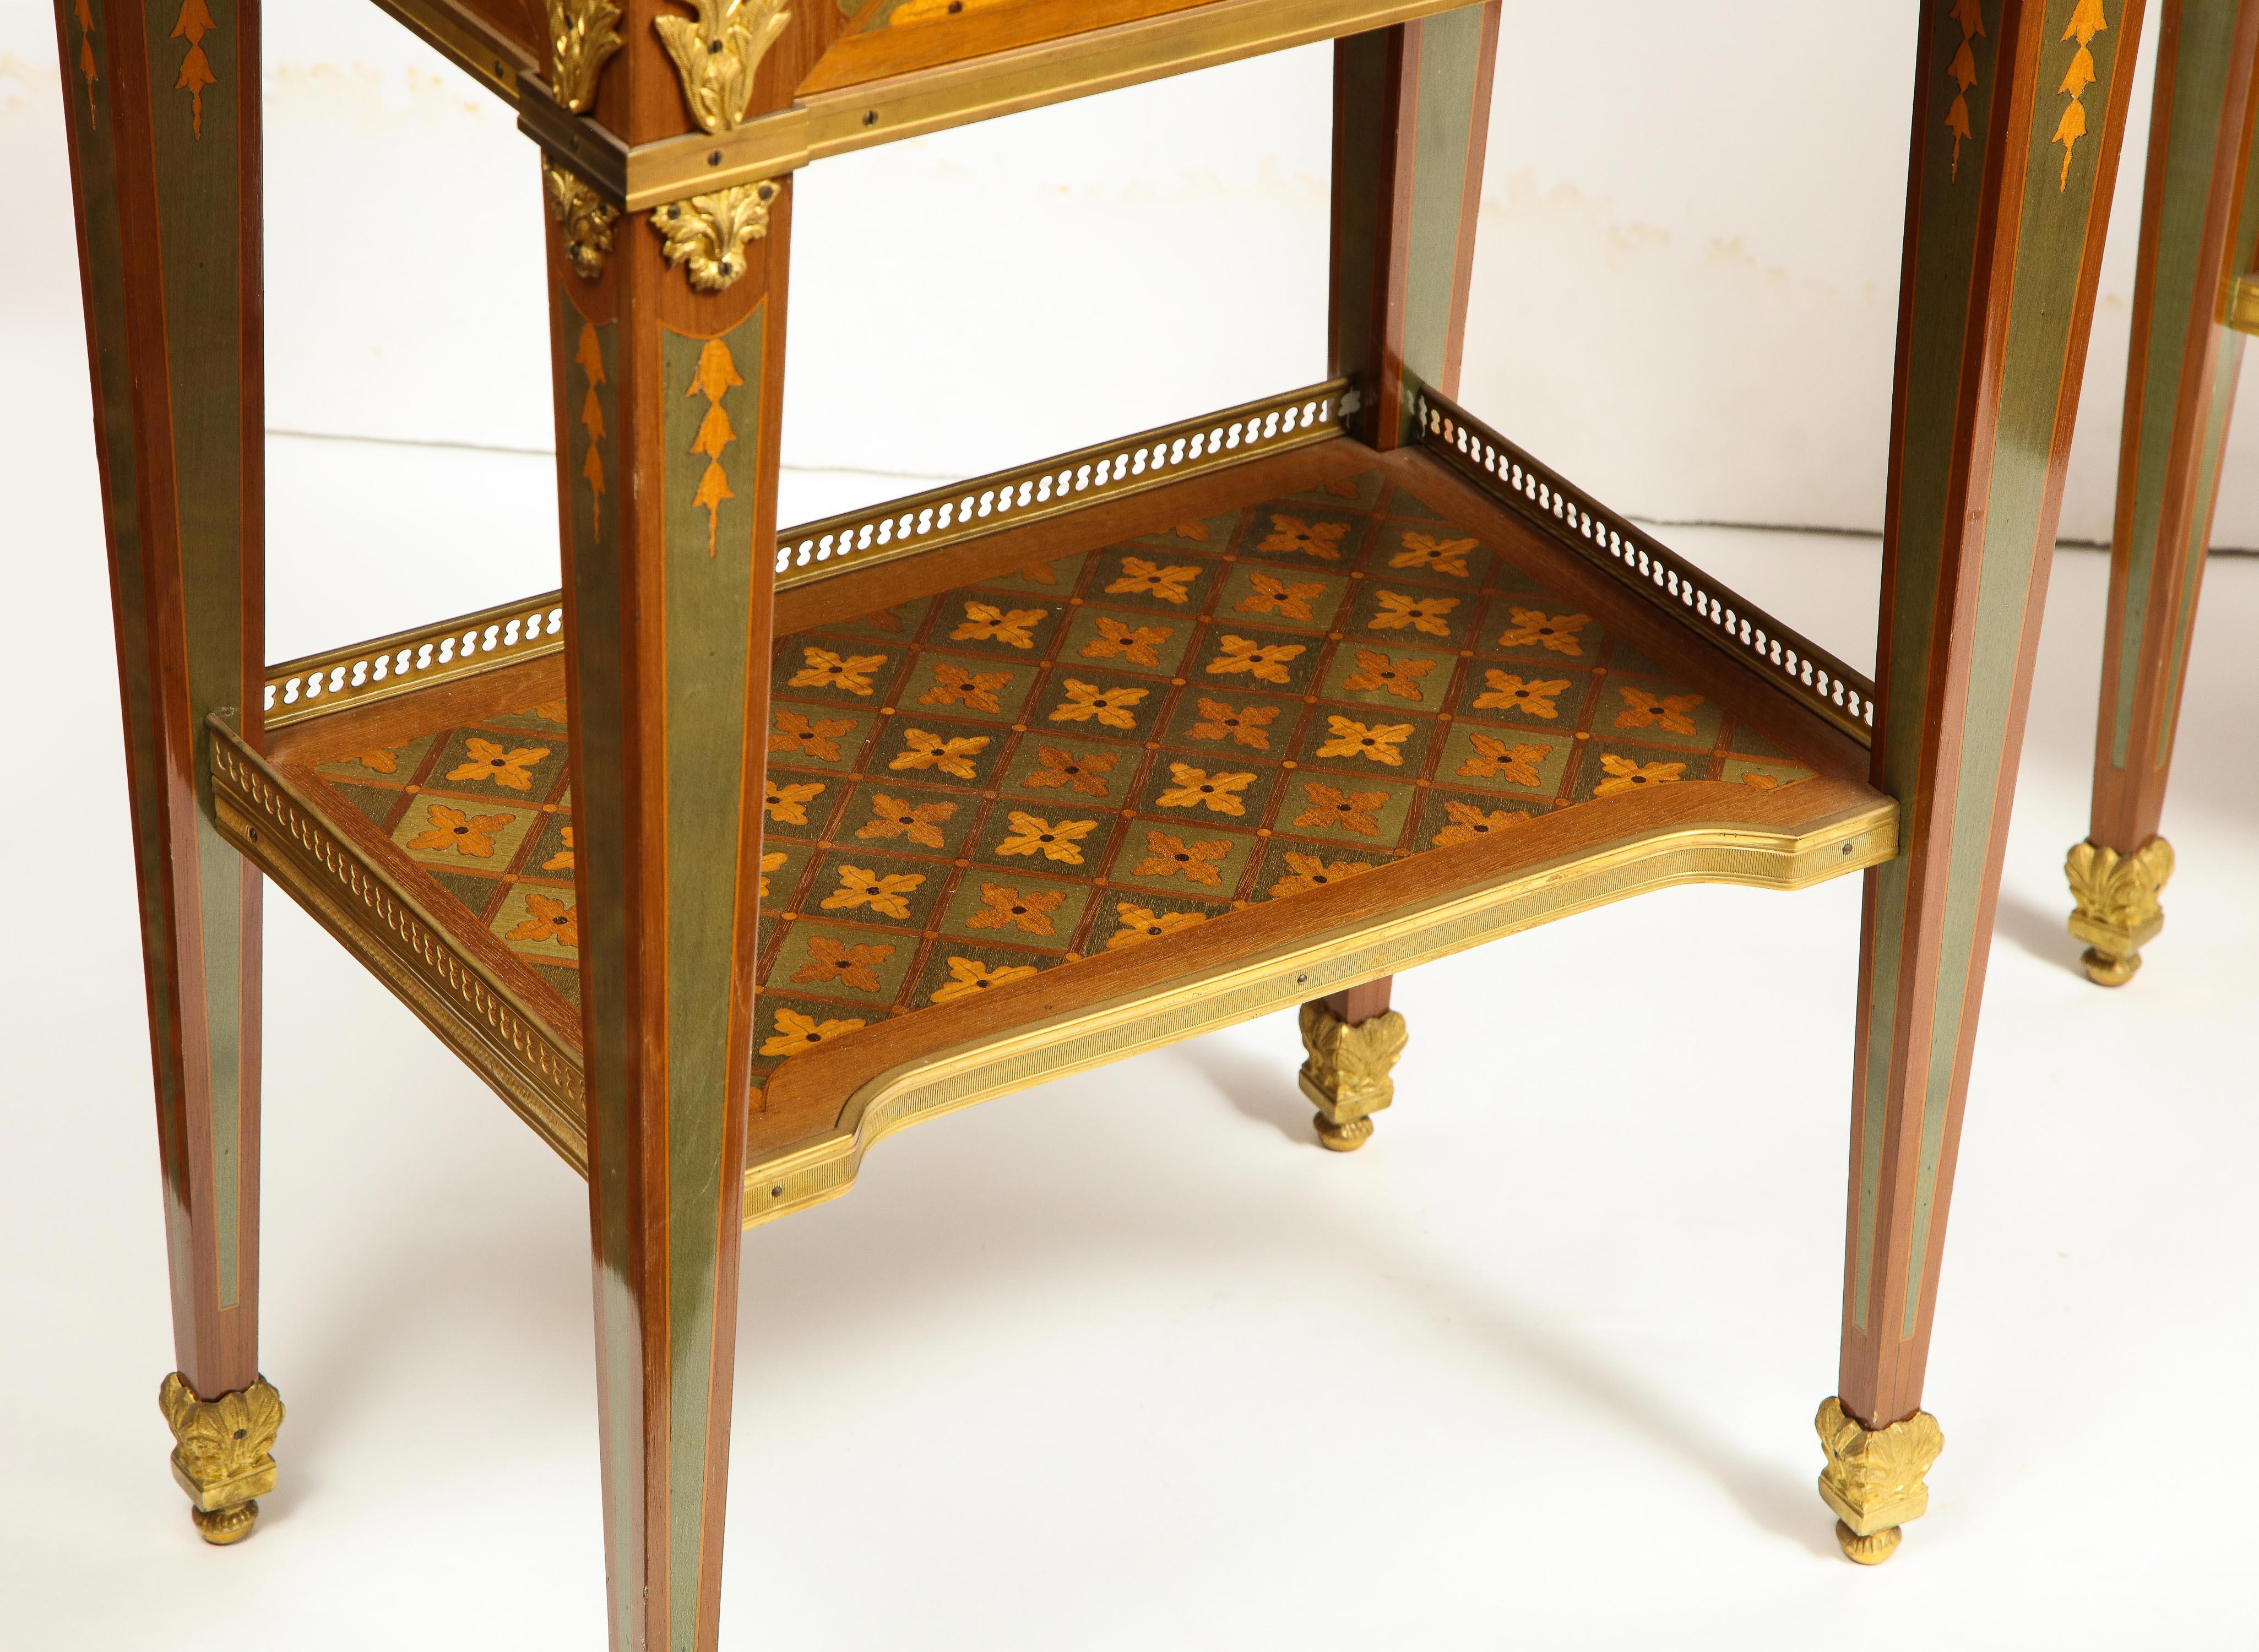 Exceptional Pair of French Ormolu-Mounted Parquetry and Marquetry Side Tables For Sale 5